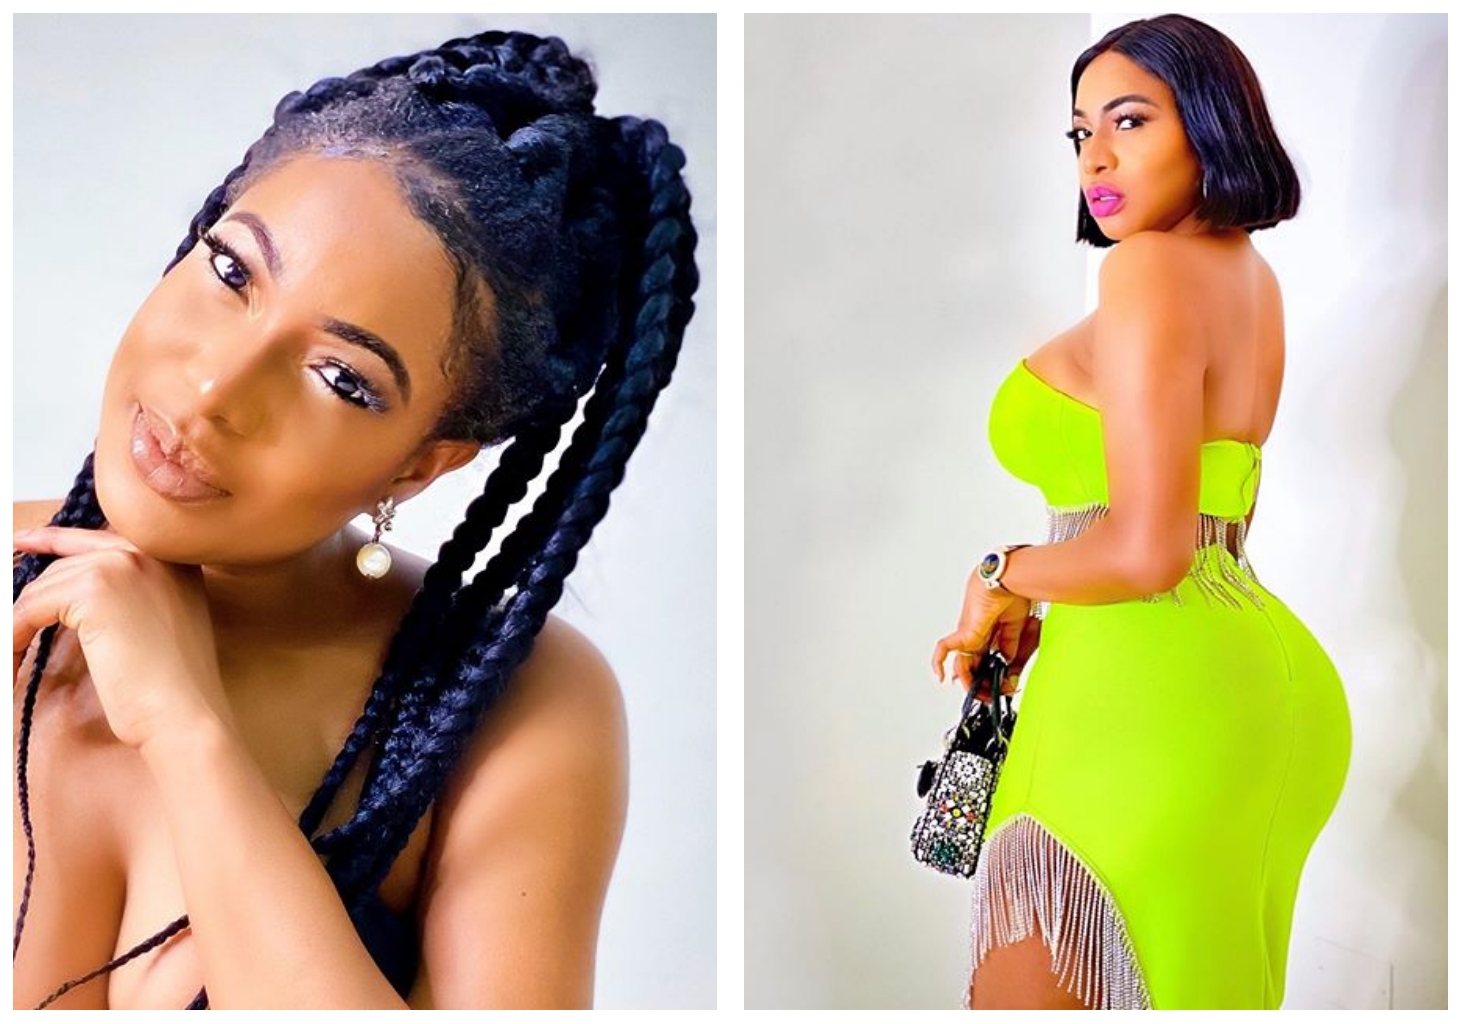 Actress Chika Ike arrest fans mind with new sexy post on IG (Photos)